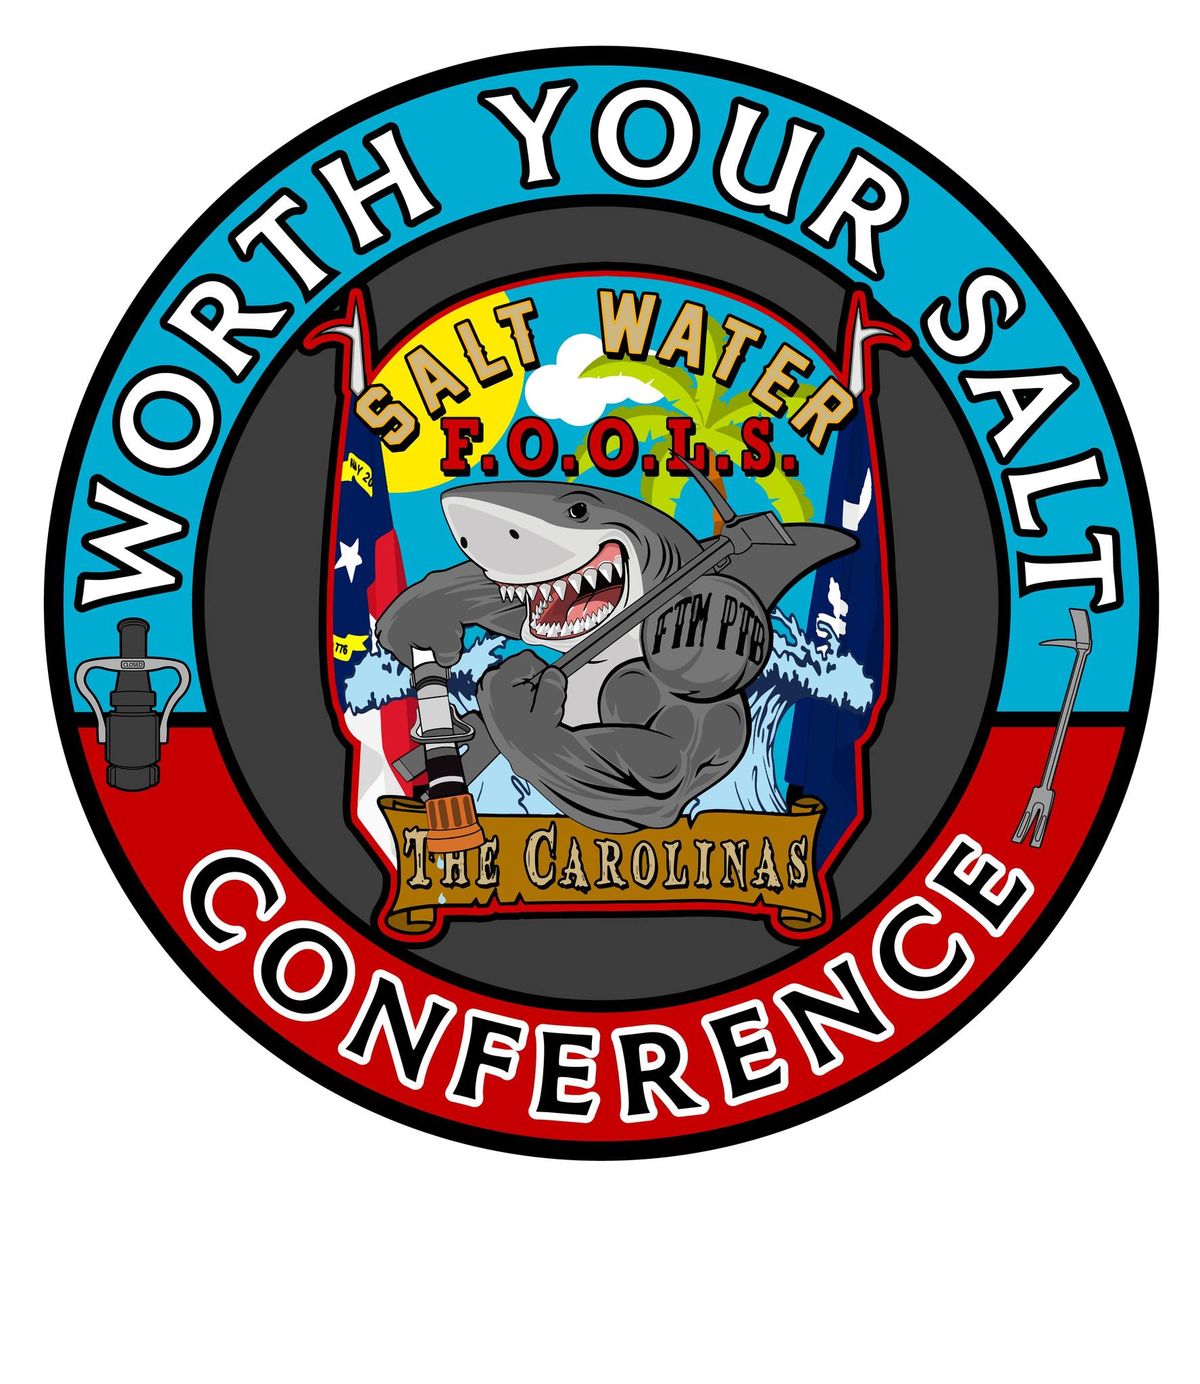 WORTH YOUR SALT CONFERENCE Hosted by the Saltwater FOOLS